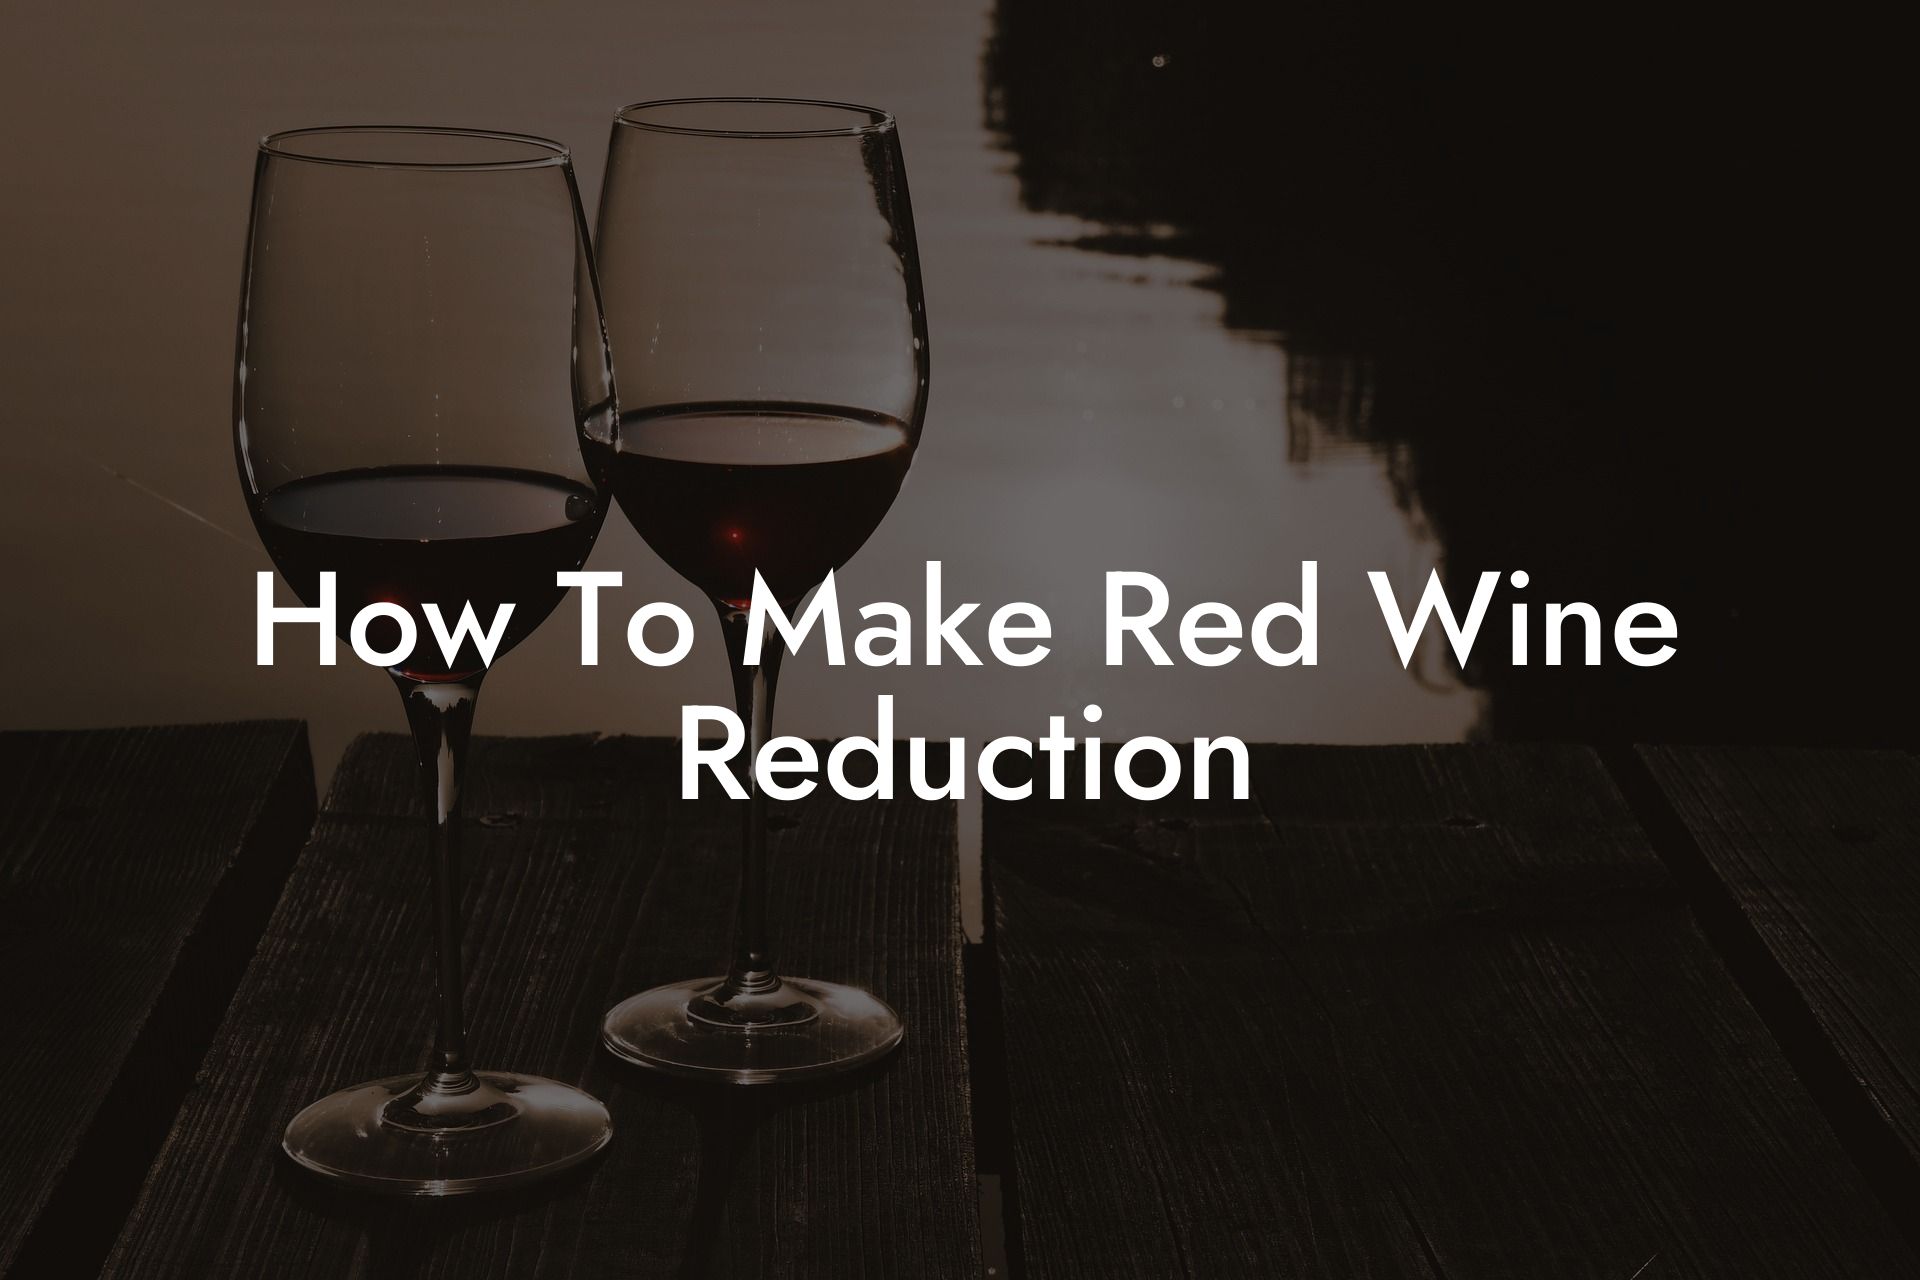 How To Make Red Wine Reduction